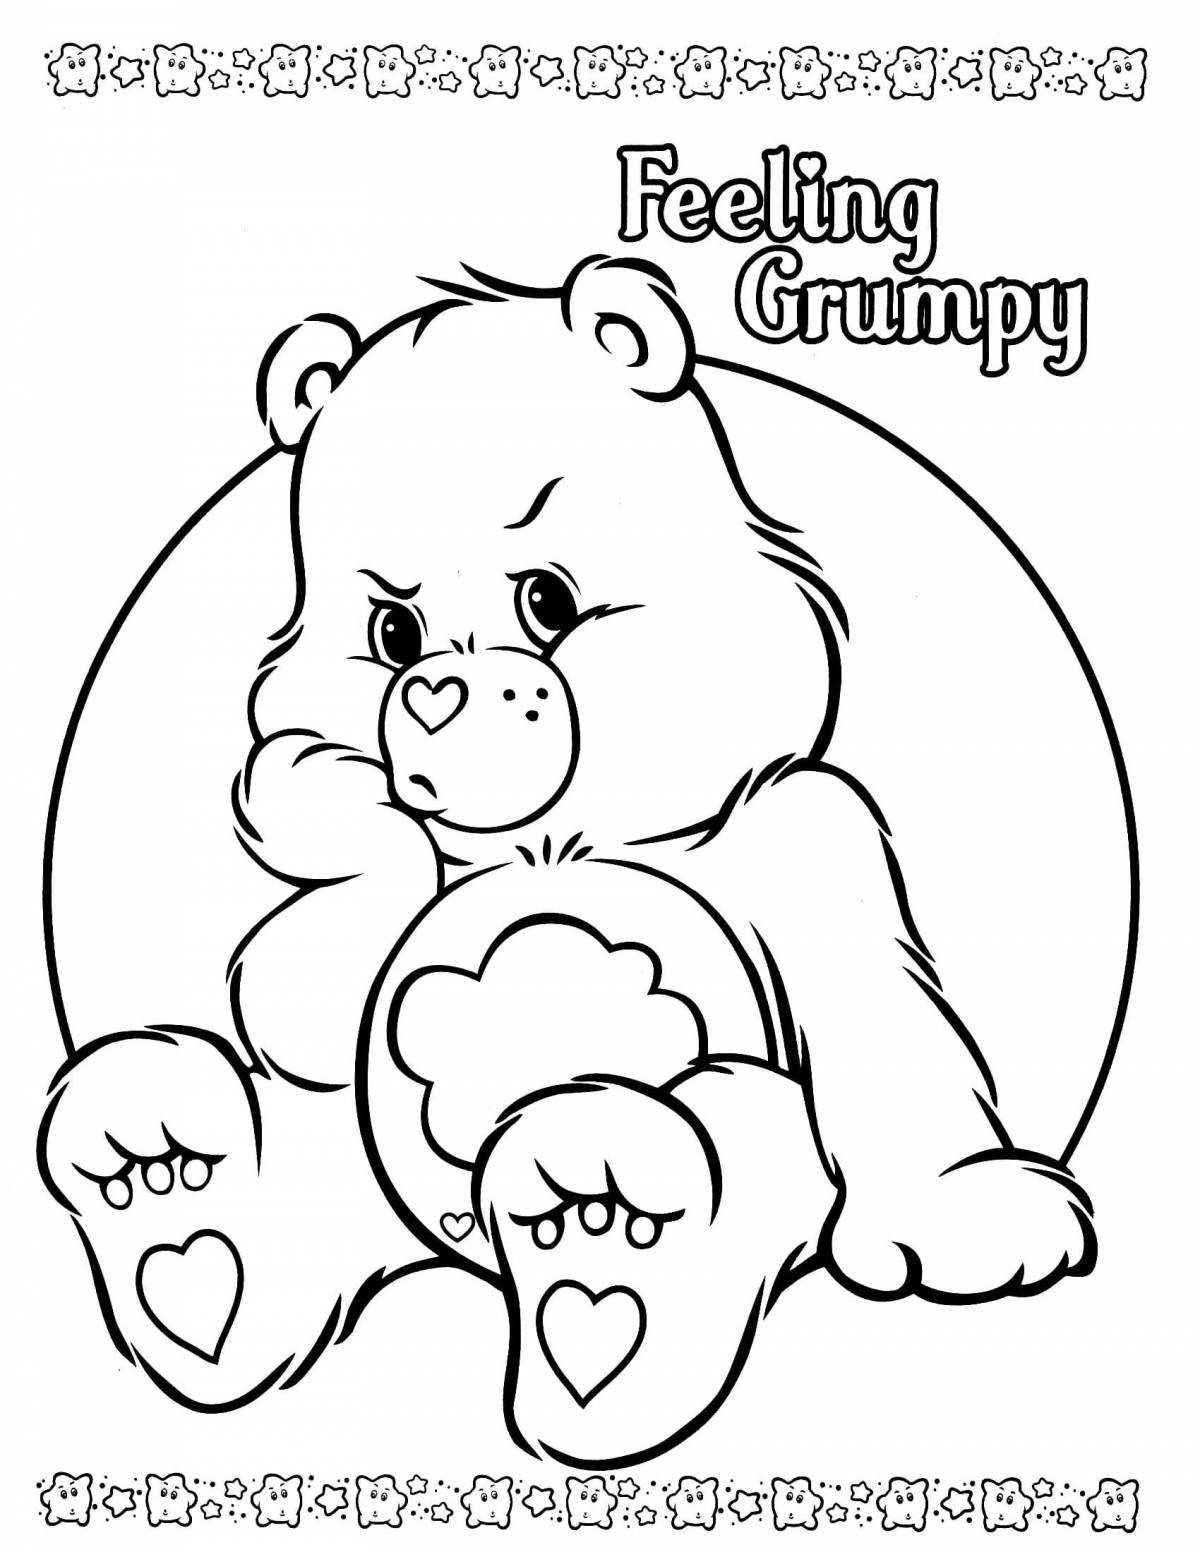 Smiling care bears coloring page